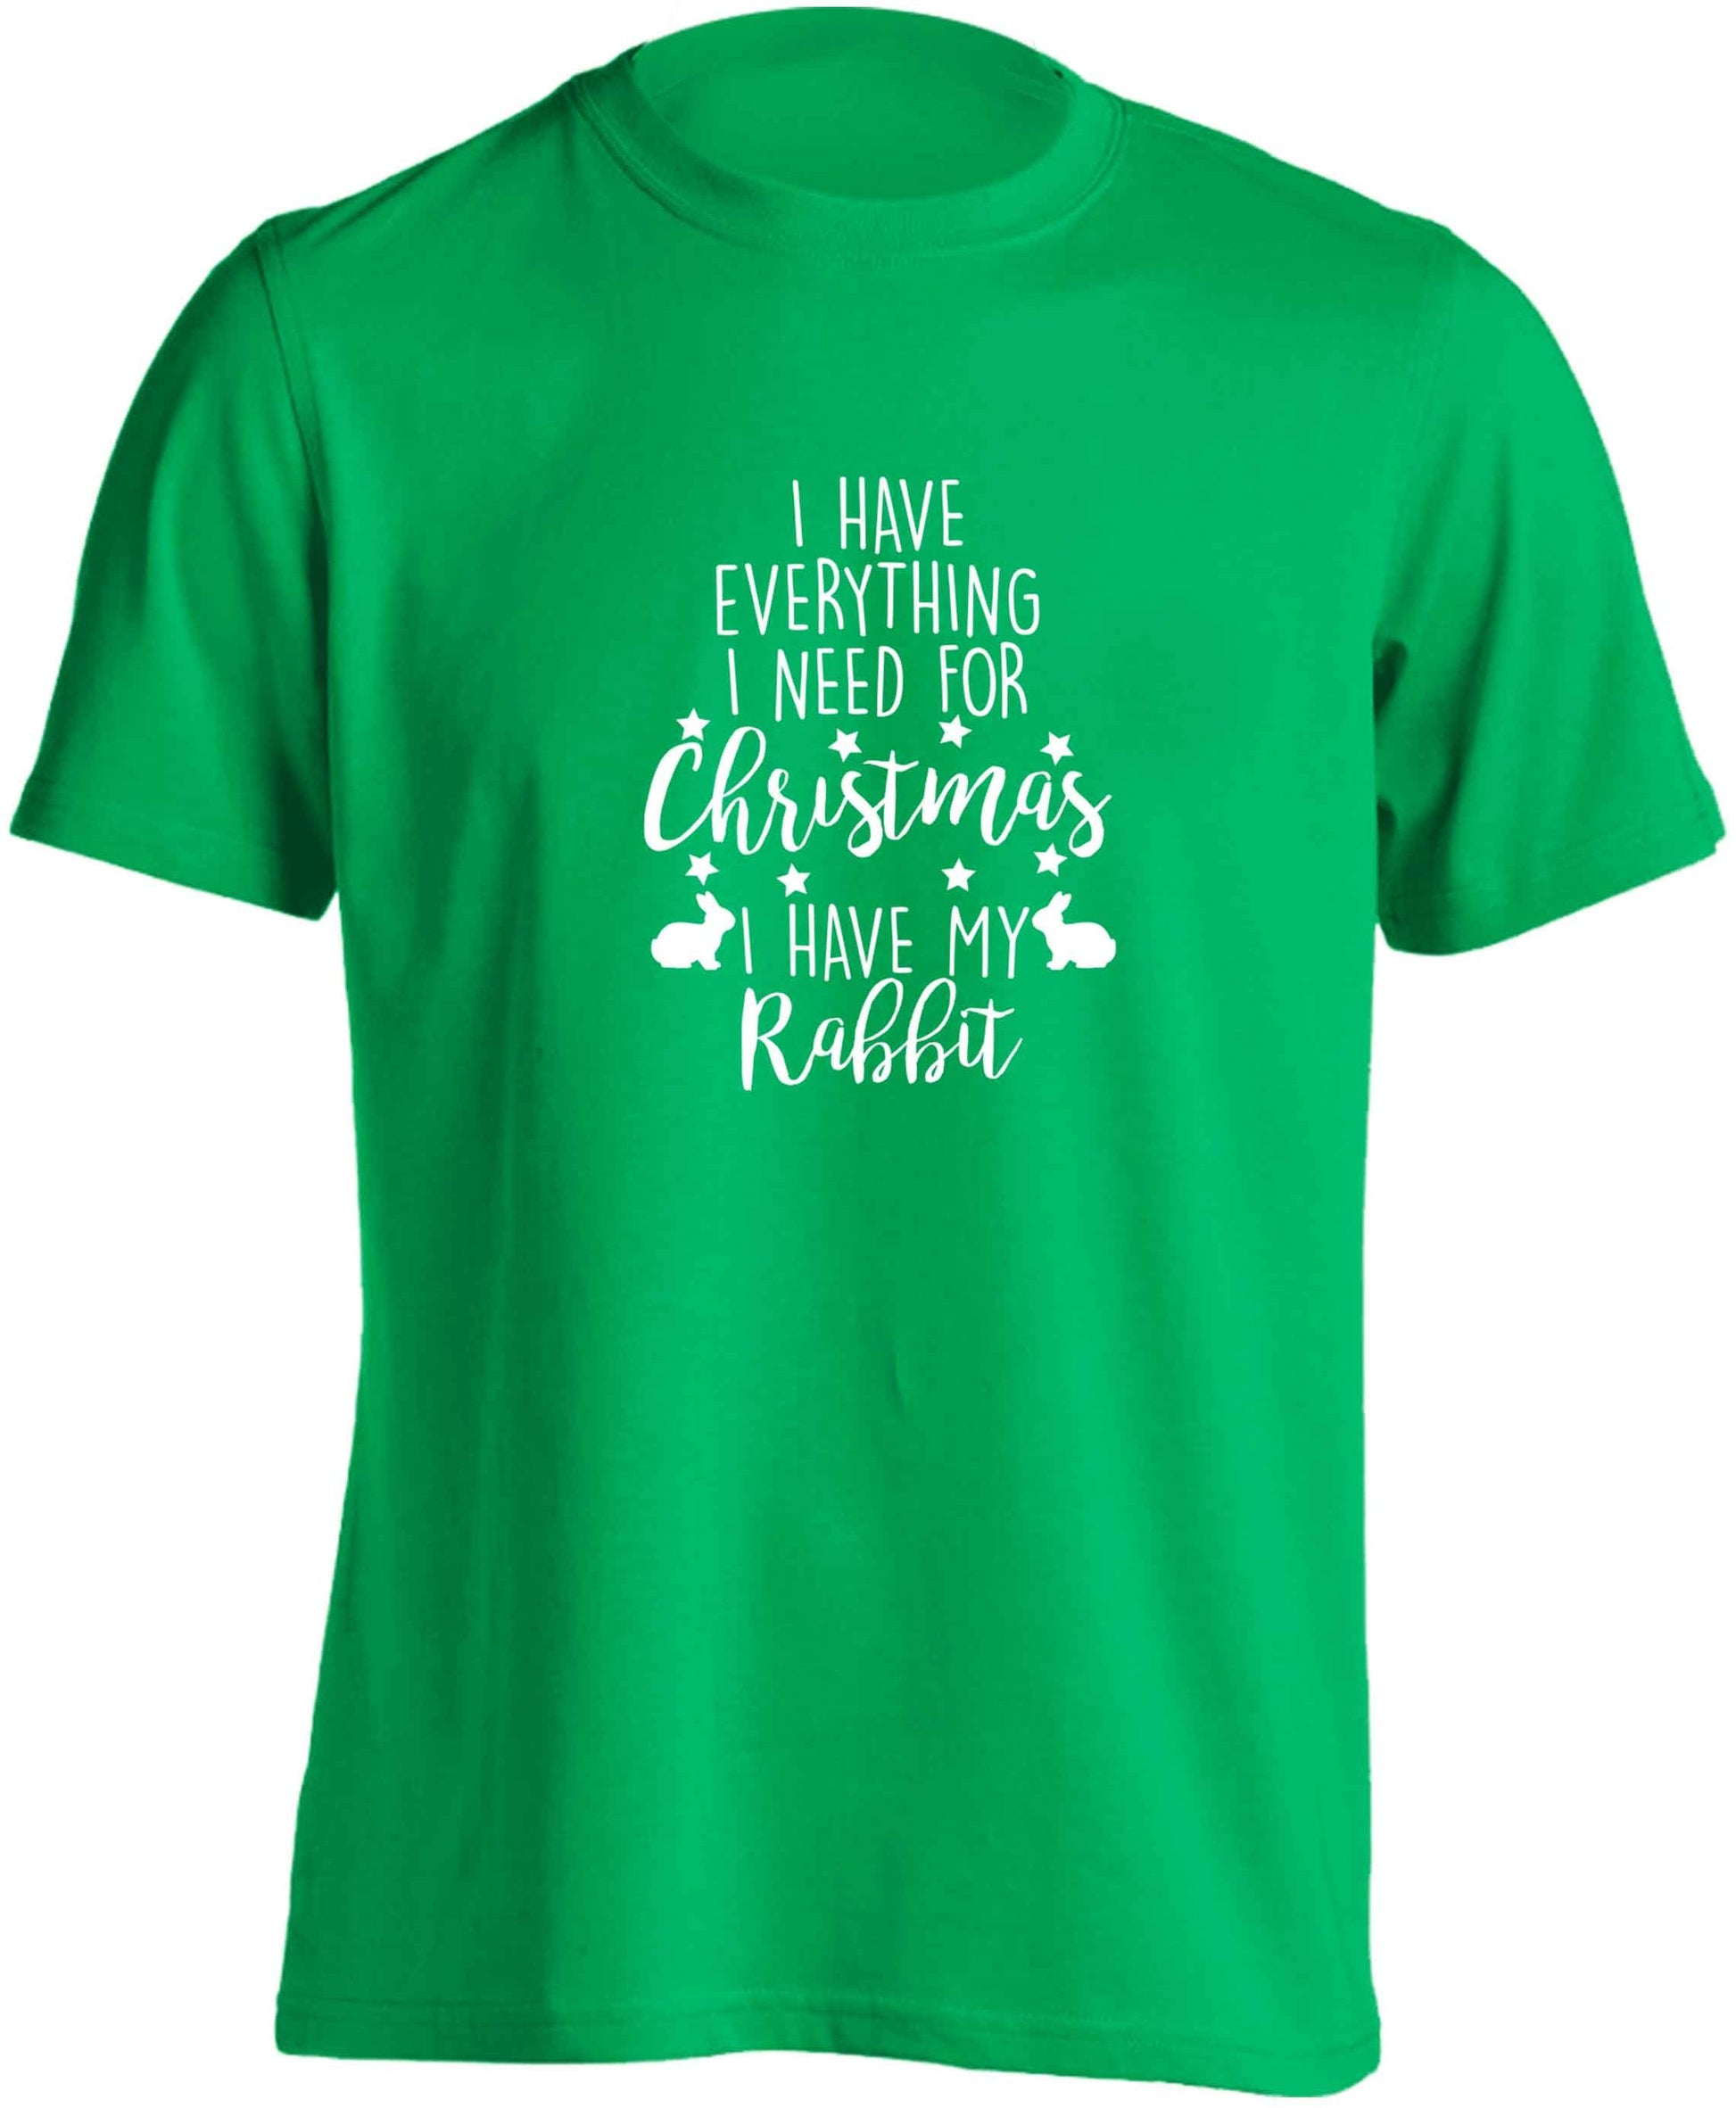 I have everything I need for Christmas I have my rabbit adults unisex green Tshirt 2XL